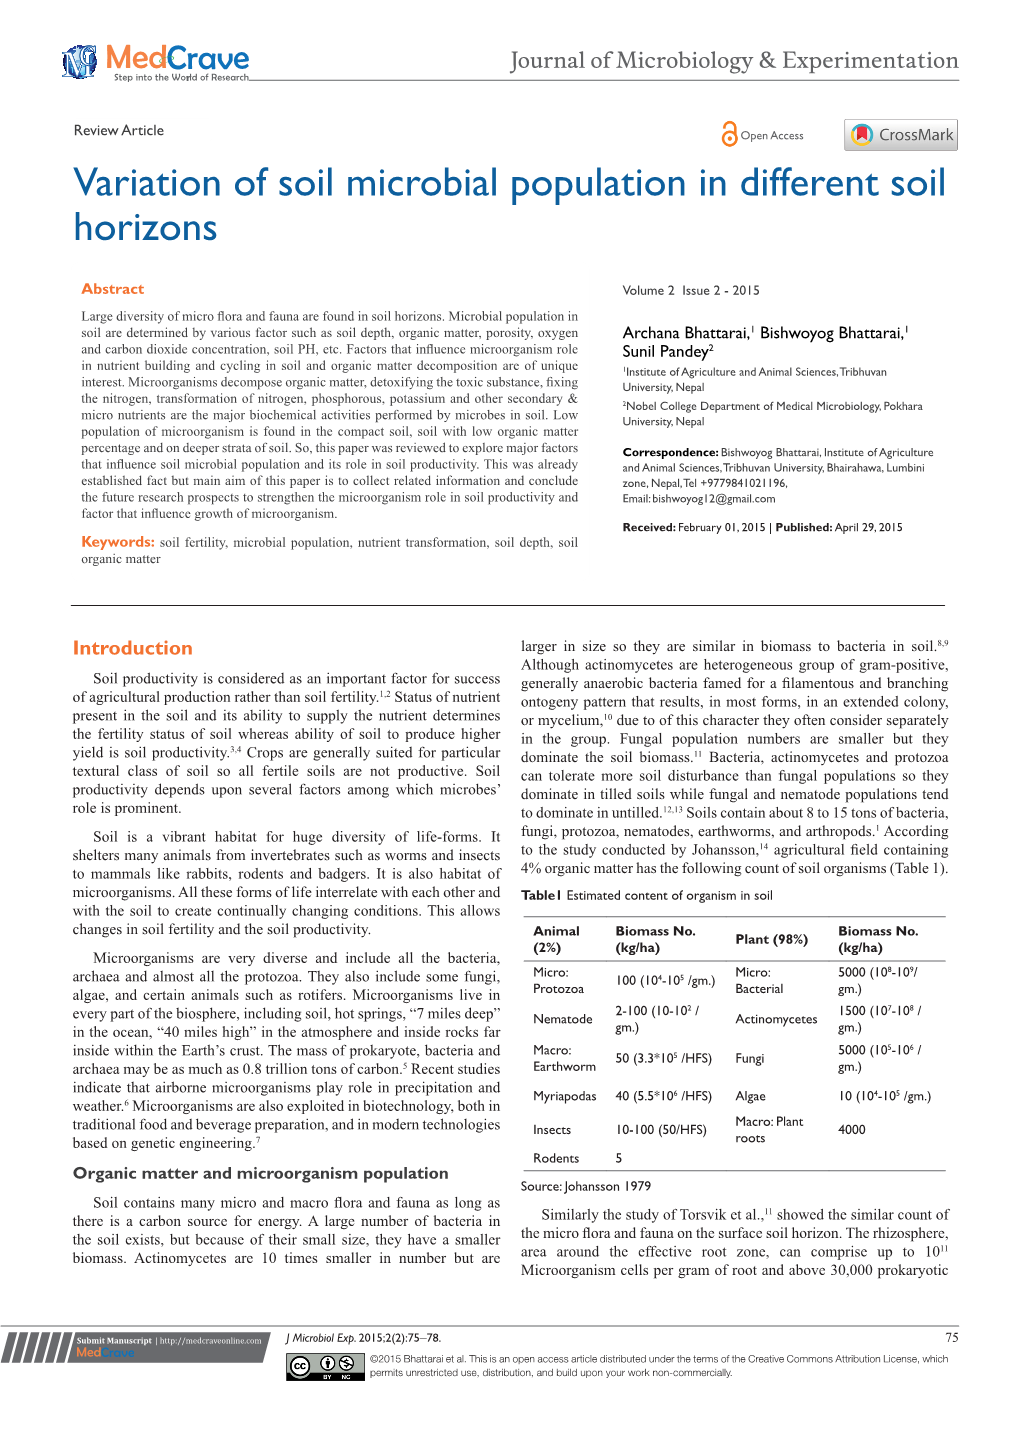 Variation of Soil Microbial Population in Different Soil Horizons;